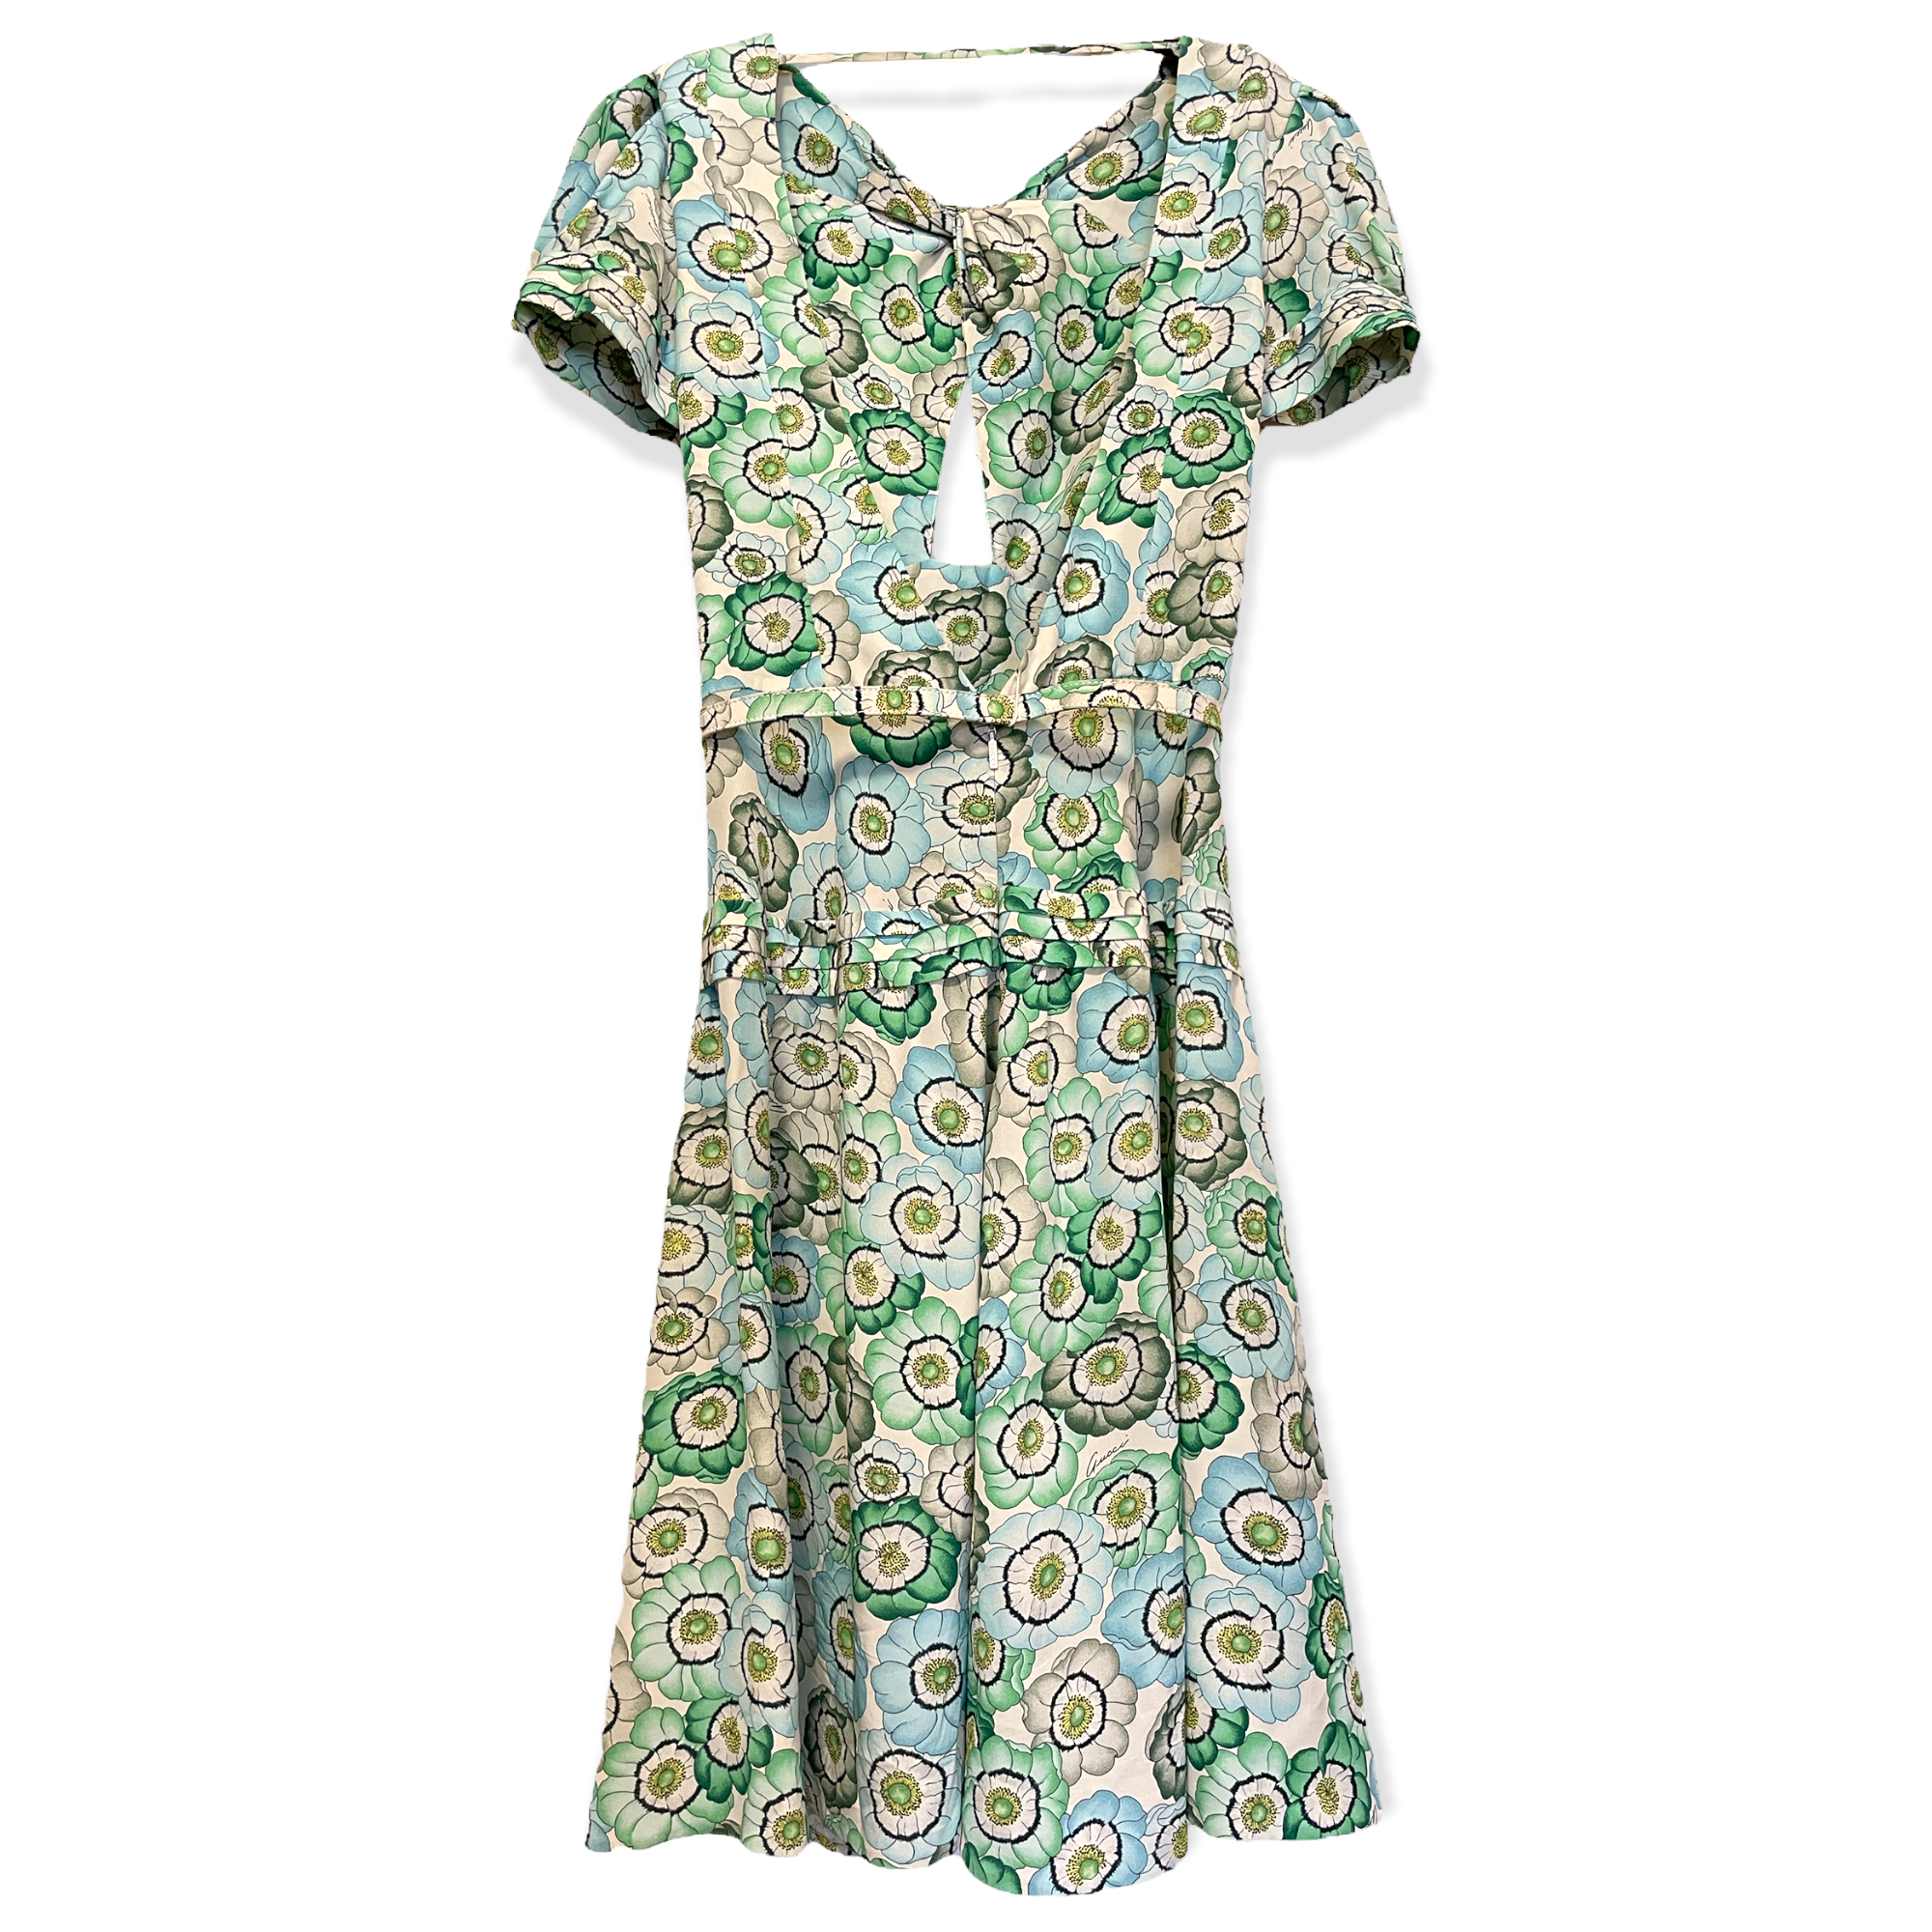 GUCCI dress in the iconic Gucci floral print |Size:IT40| Made in Italy